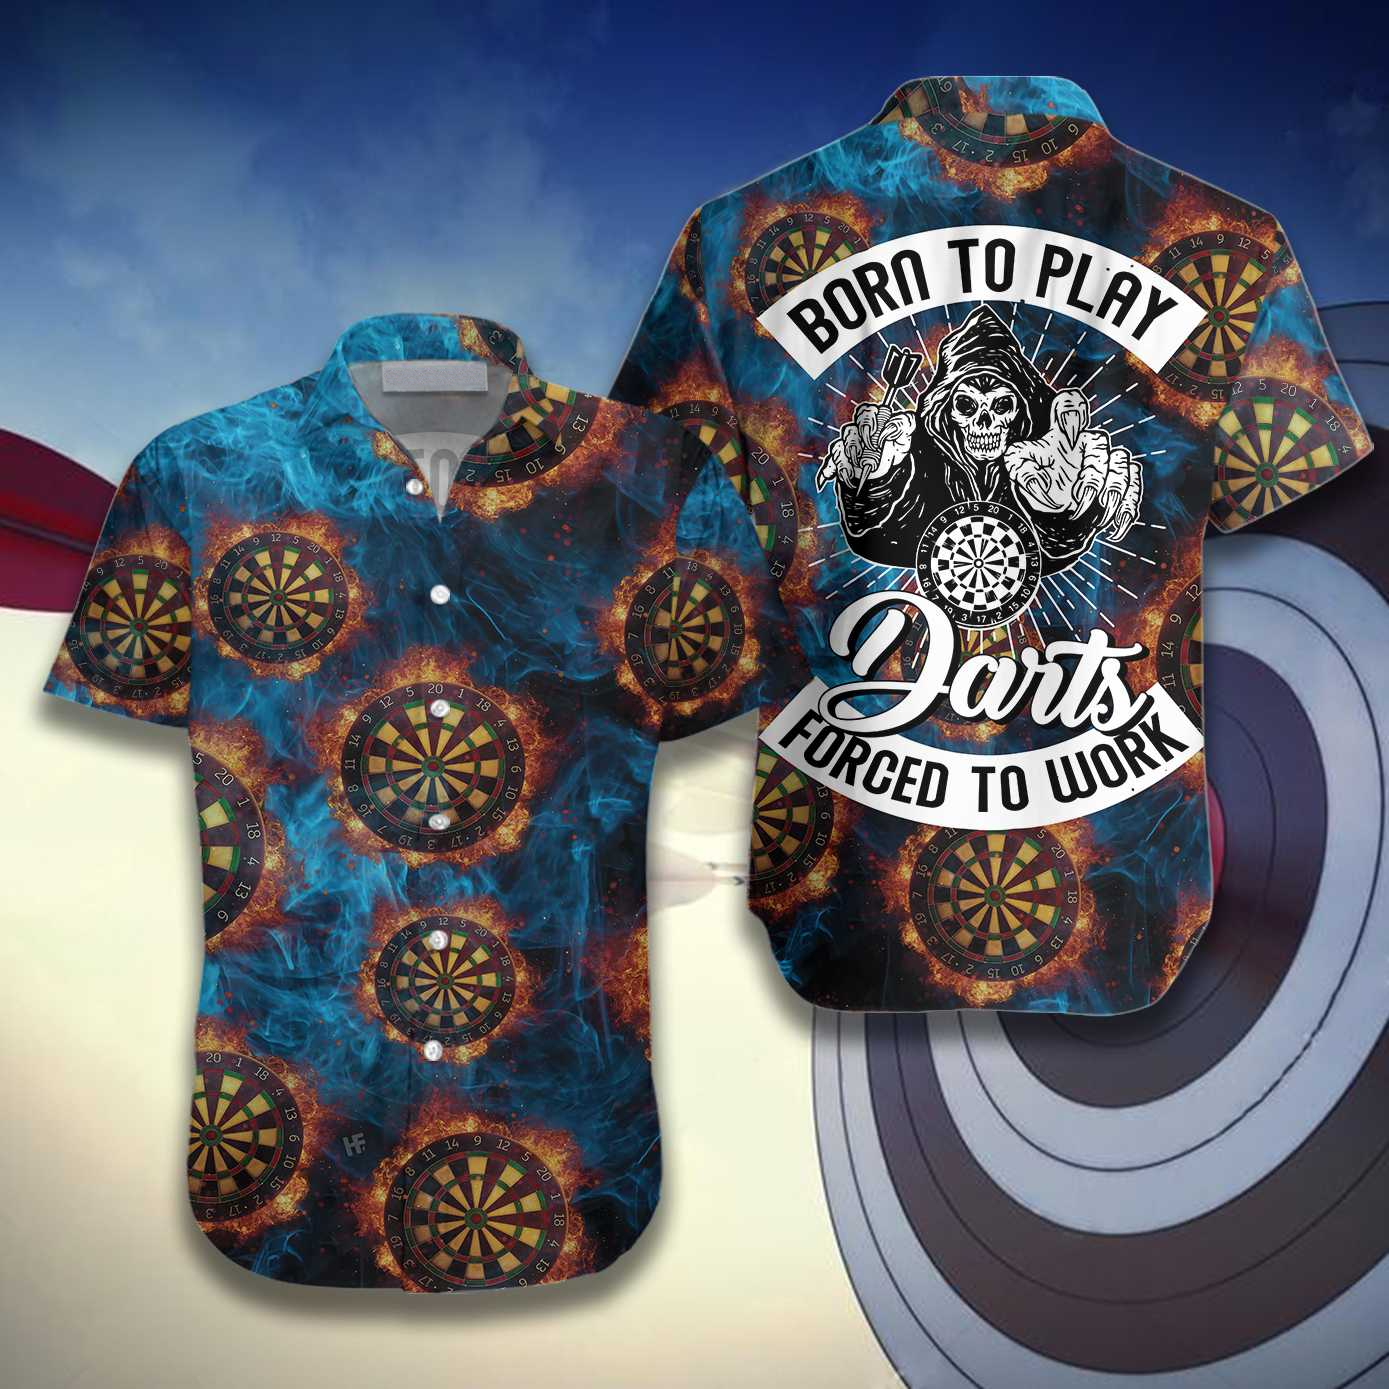 Born To Play Dart Forced To Work Hawaiian Shirt/ Colorful Summer Aloha Shirt For Men Women/ Gift For Friend/ Team/ Family/ Dart Lovers